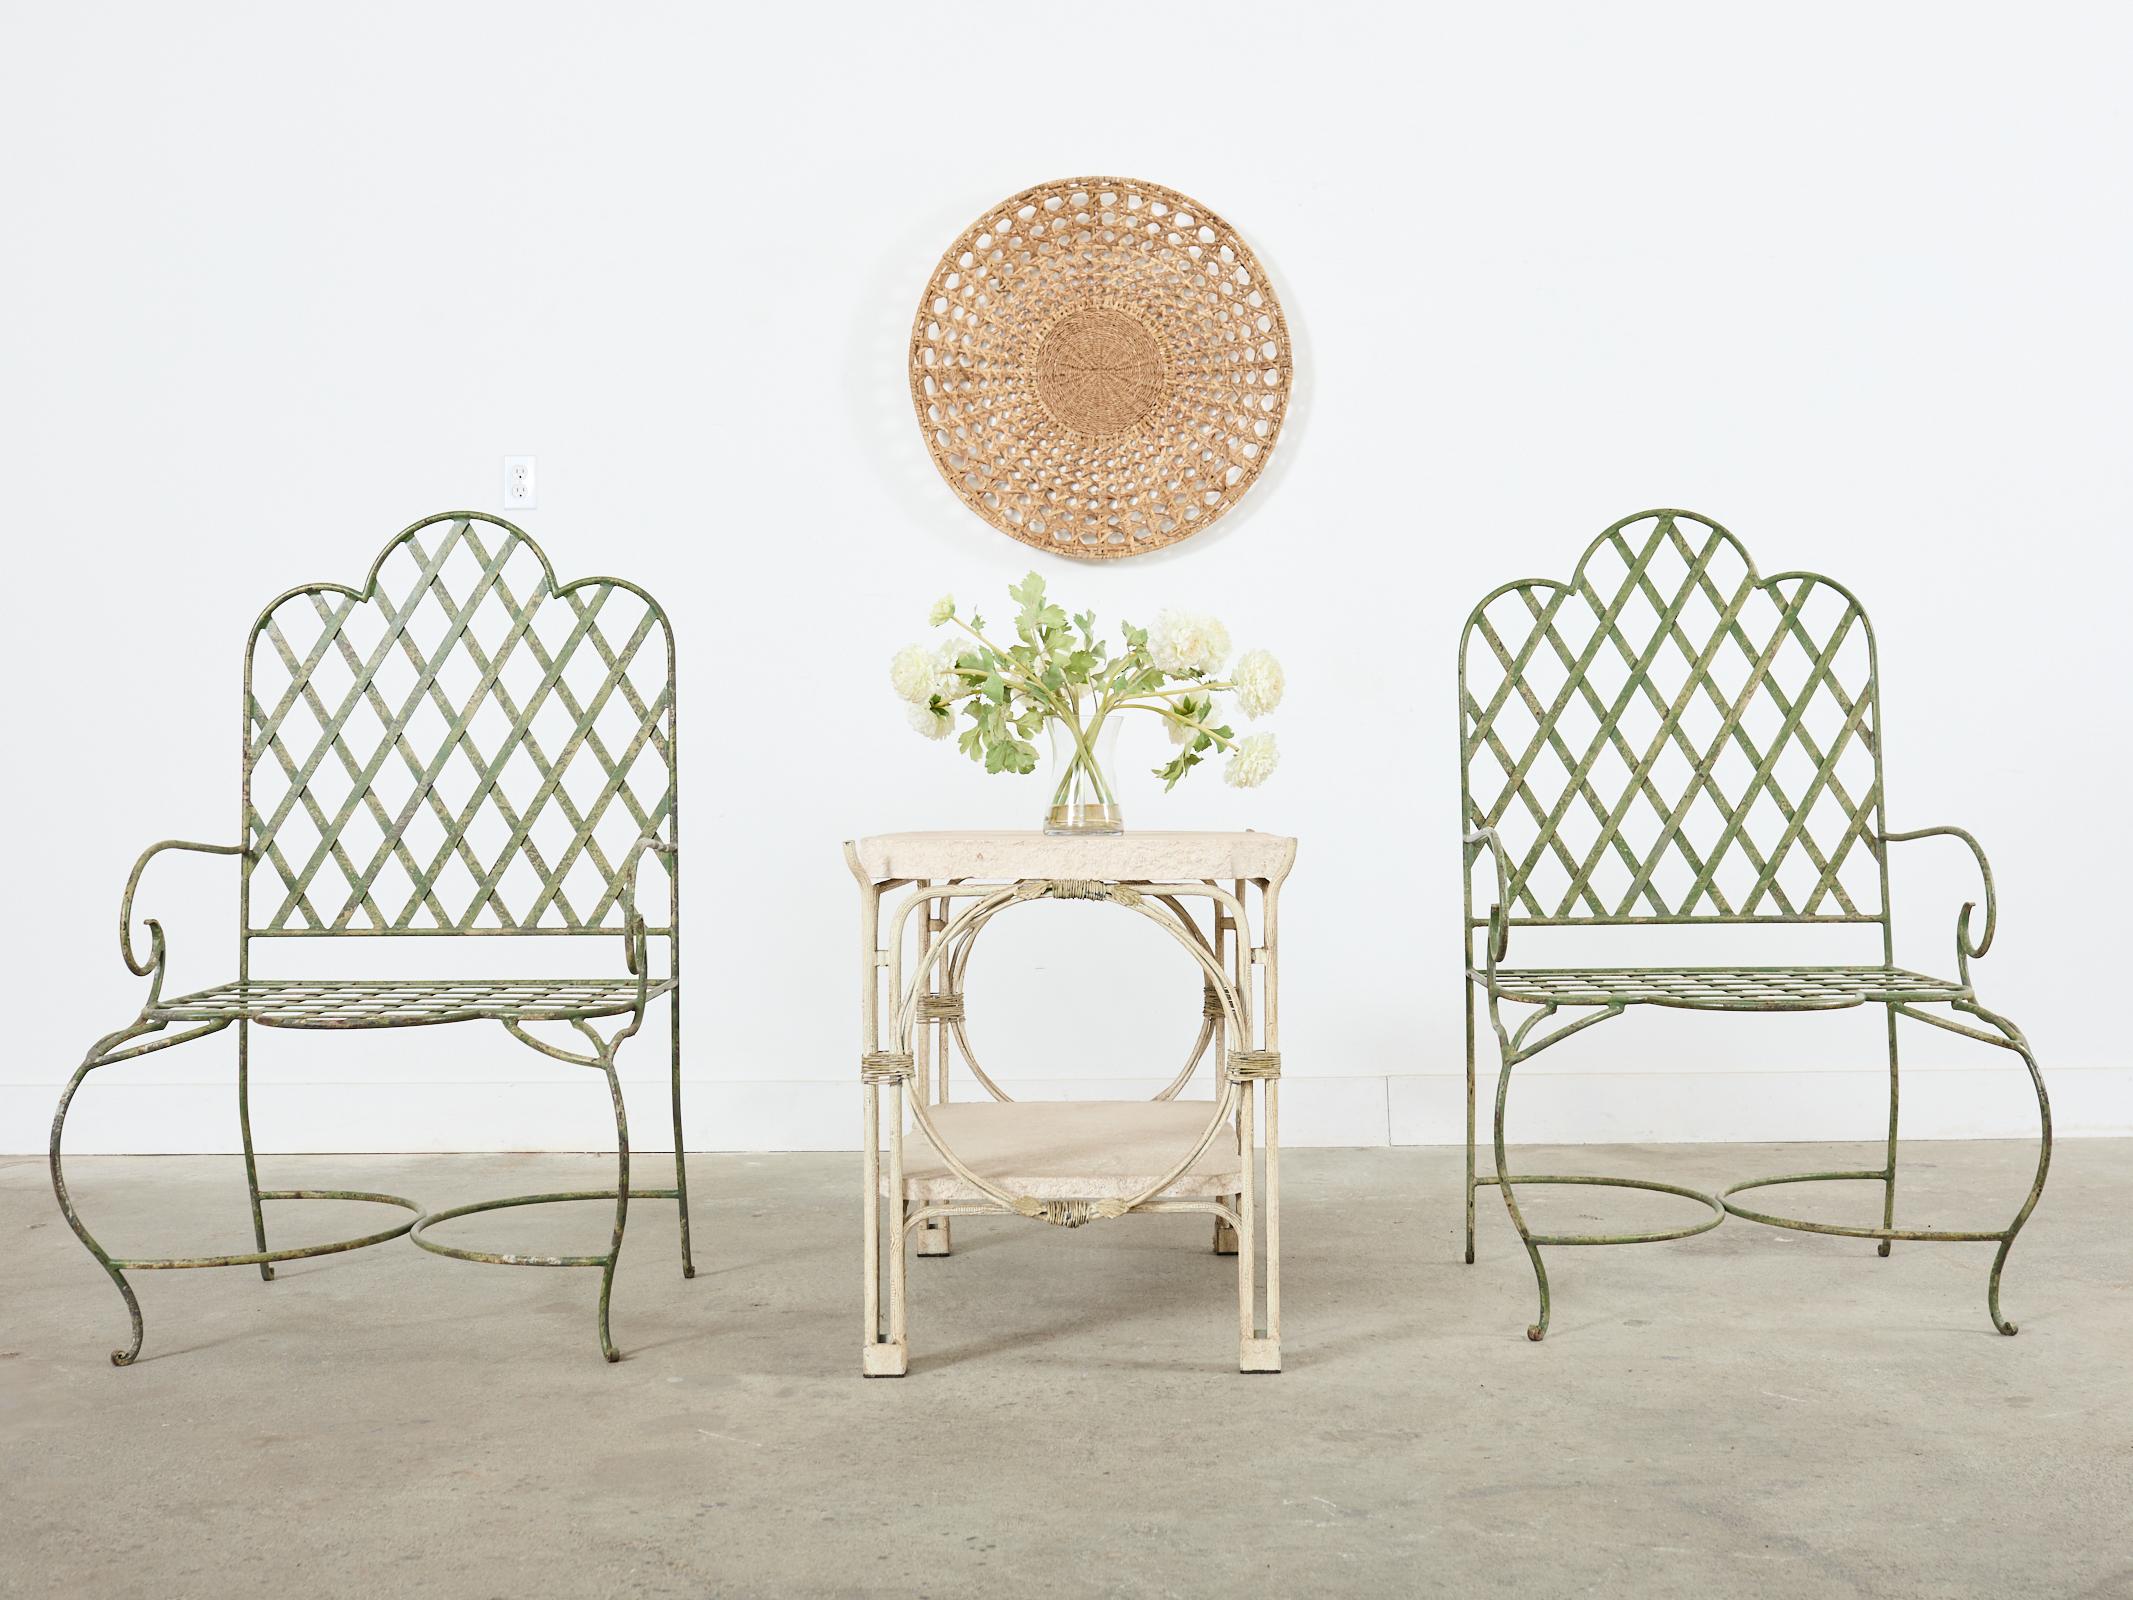 Striking pair of patio and garden two-tier tables made in the style and manner or Rose Tarlow's iron twig outdoor collection. The tables feature an iron frame with a faux bois twig branch finish. The frames are topped with thick slabs of travertine